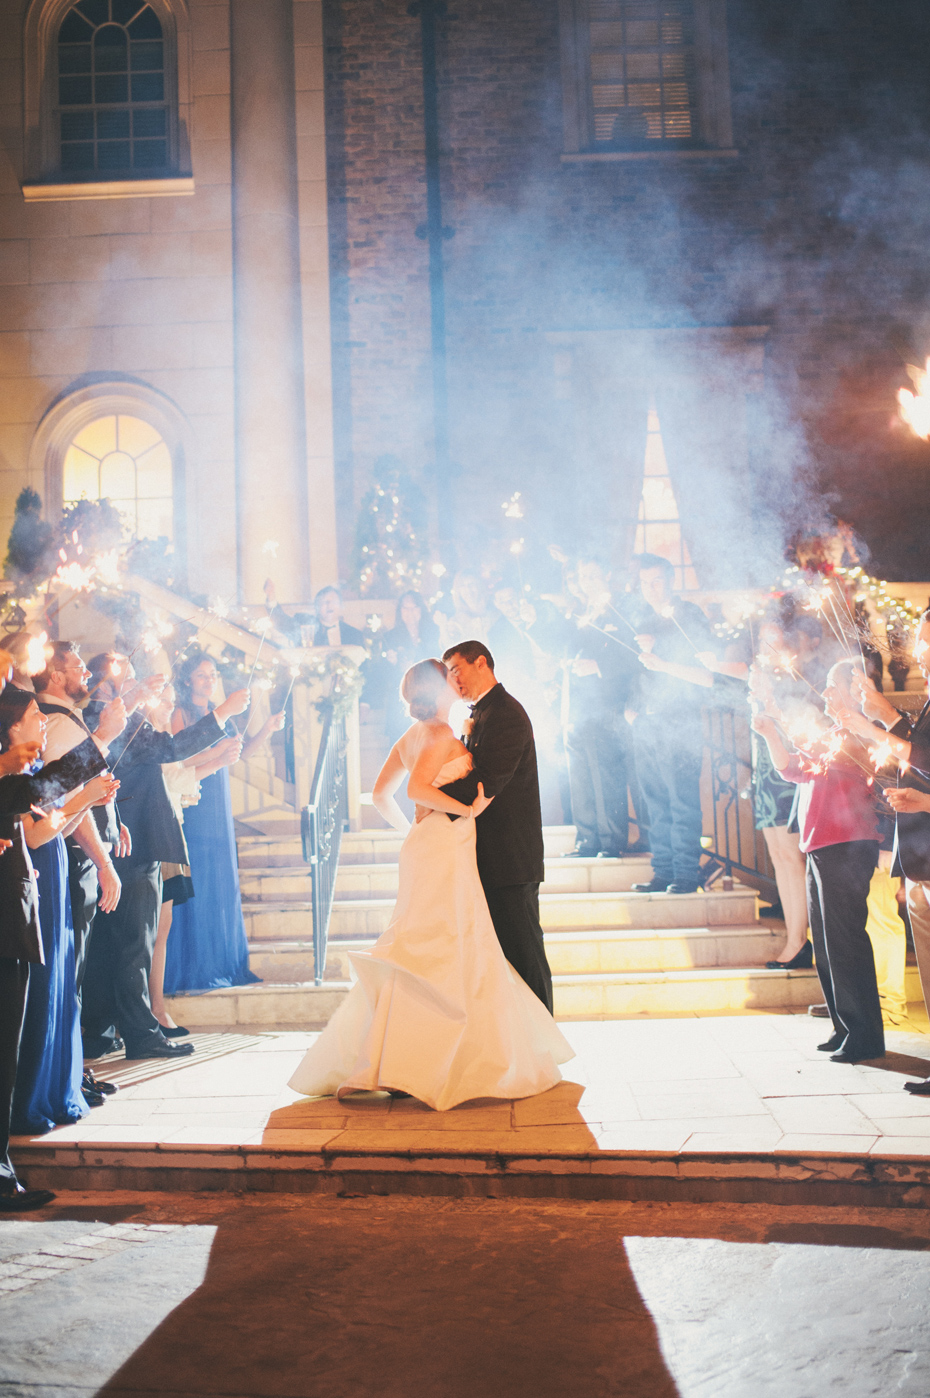 The bride and groom pause for a kiss during their sparkler exit at a wedding reception at The Fountainview Mansion in Auburn Alabama, photographed by Ann Arbor Wedding Photographer Heather Jowett.